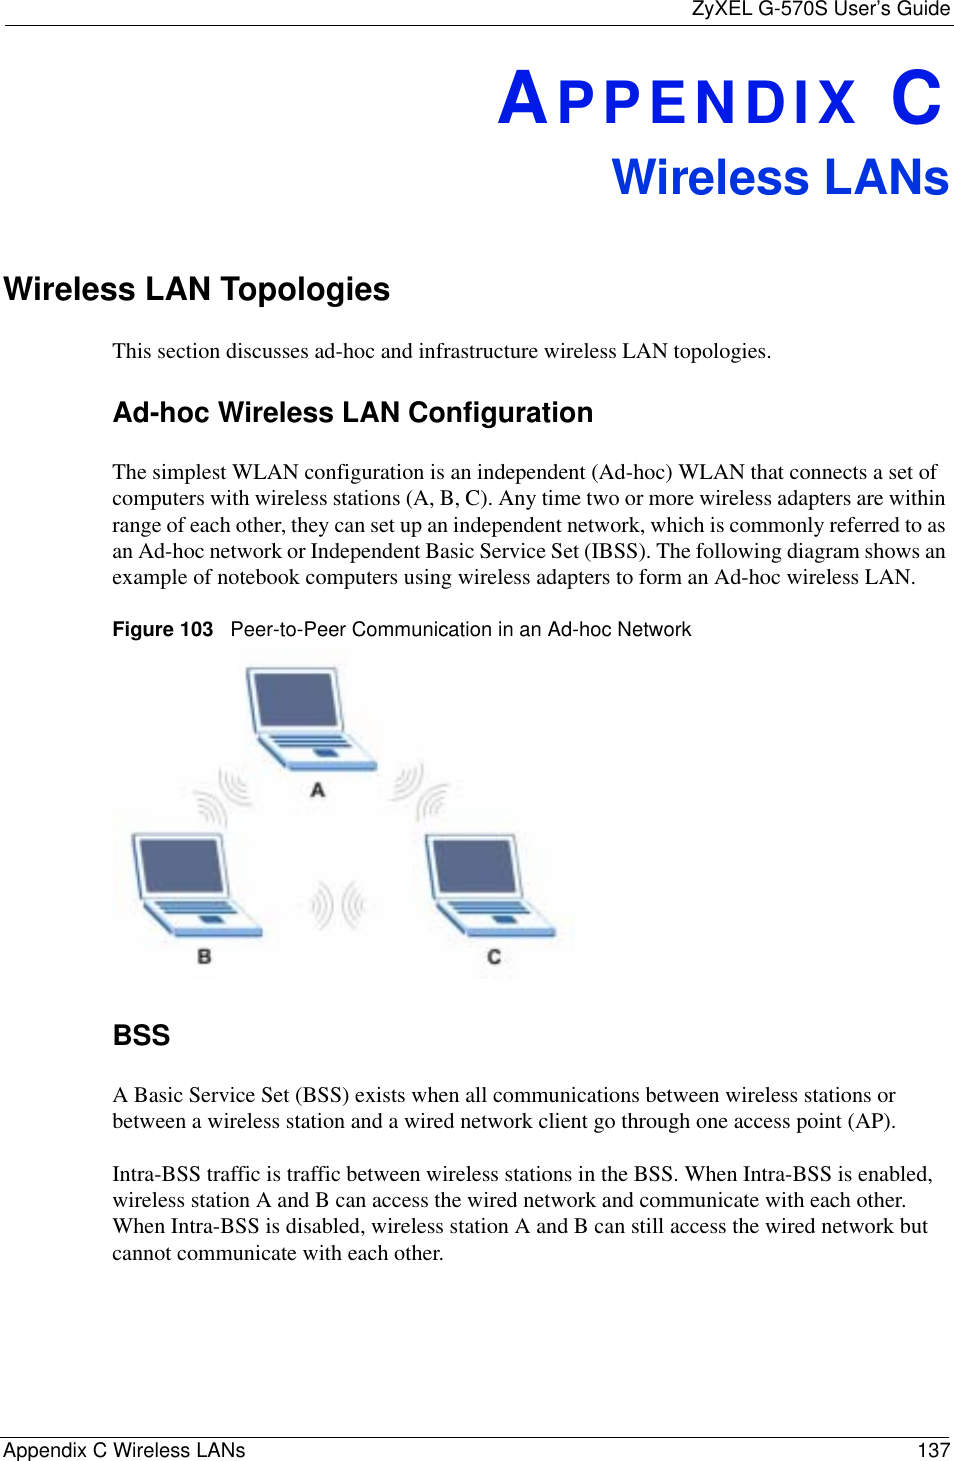 ZyXEL G-570S User’s GuideAppendix C Wireless LANs 137APPENDIX CWireless LANsWireless LAN TopologiesThis section discusses ad-hoc and infrastructure wireless LAN topologies.Ad-hoc Wireless LAN ConfigurationThe simplest WLAN configuration is an independent (Ad-hoc) WLAN that connects a set of computers with wireless stations (A, B, C). Any time two or more wireless adapters are within range of each other, they can set up an independent network, which is commonly referred to as an Ad-hoc network or Independent Basic Service Set (IBSS). The following diagram shows an example of notebook computers using wireless adapters to form an Ad-hoc wireless LAN. Figure 103   Peer-to-Peer Communication in an Ad-hoc NetworkBSSA Basic Service Set (BSS) exists when all communications between wireless stations or between a wireless station and a wired network client go through one access point (AP). Intra-BSS traffic is traffic between wireless stations in the BSS. When Intra-BSS is enabled, wireless station A and B can access the wired network and communicate with each other. When Intra-BSS is disabled, wireless station A and B can still access the wired network but cannot communicate with each other.